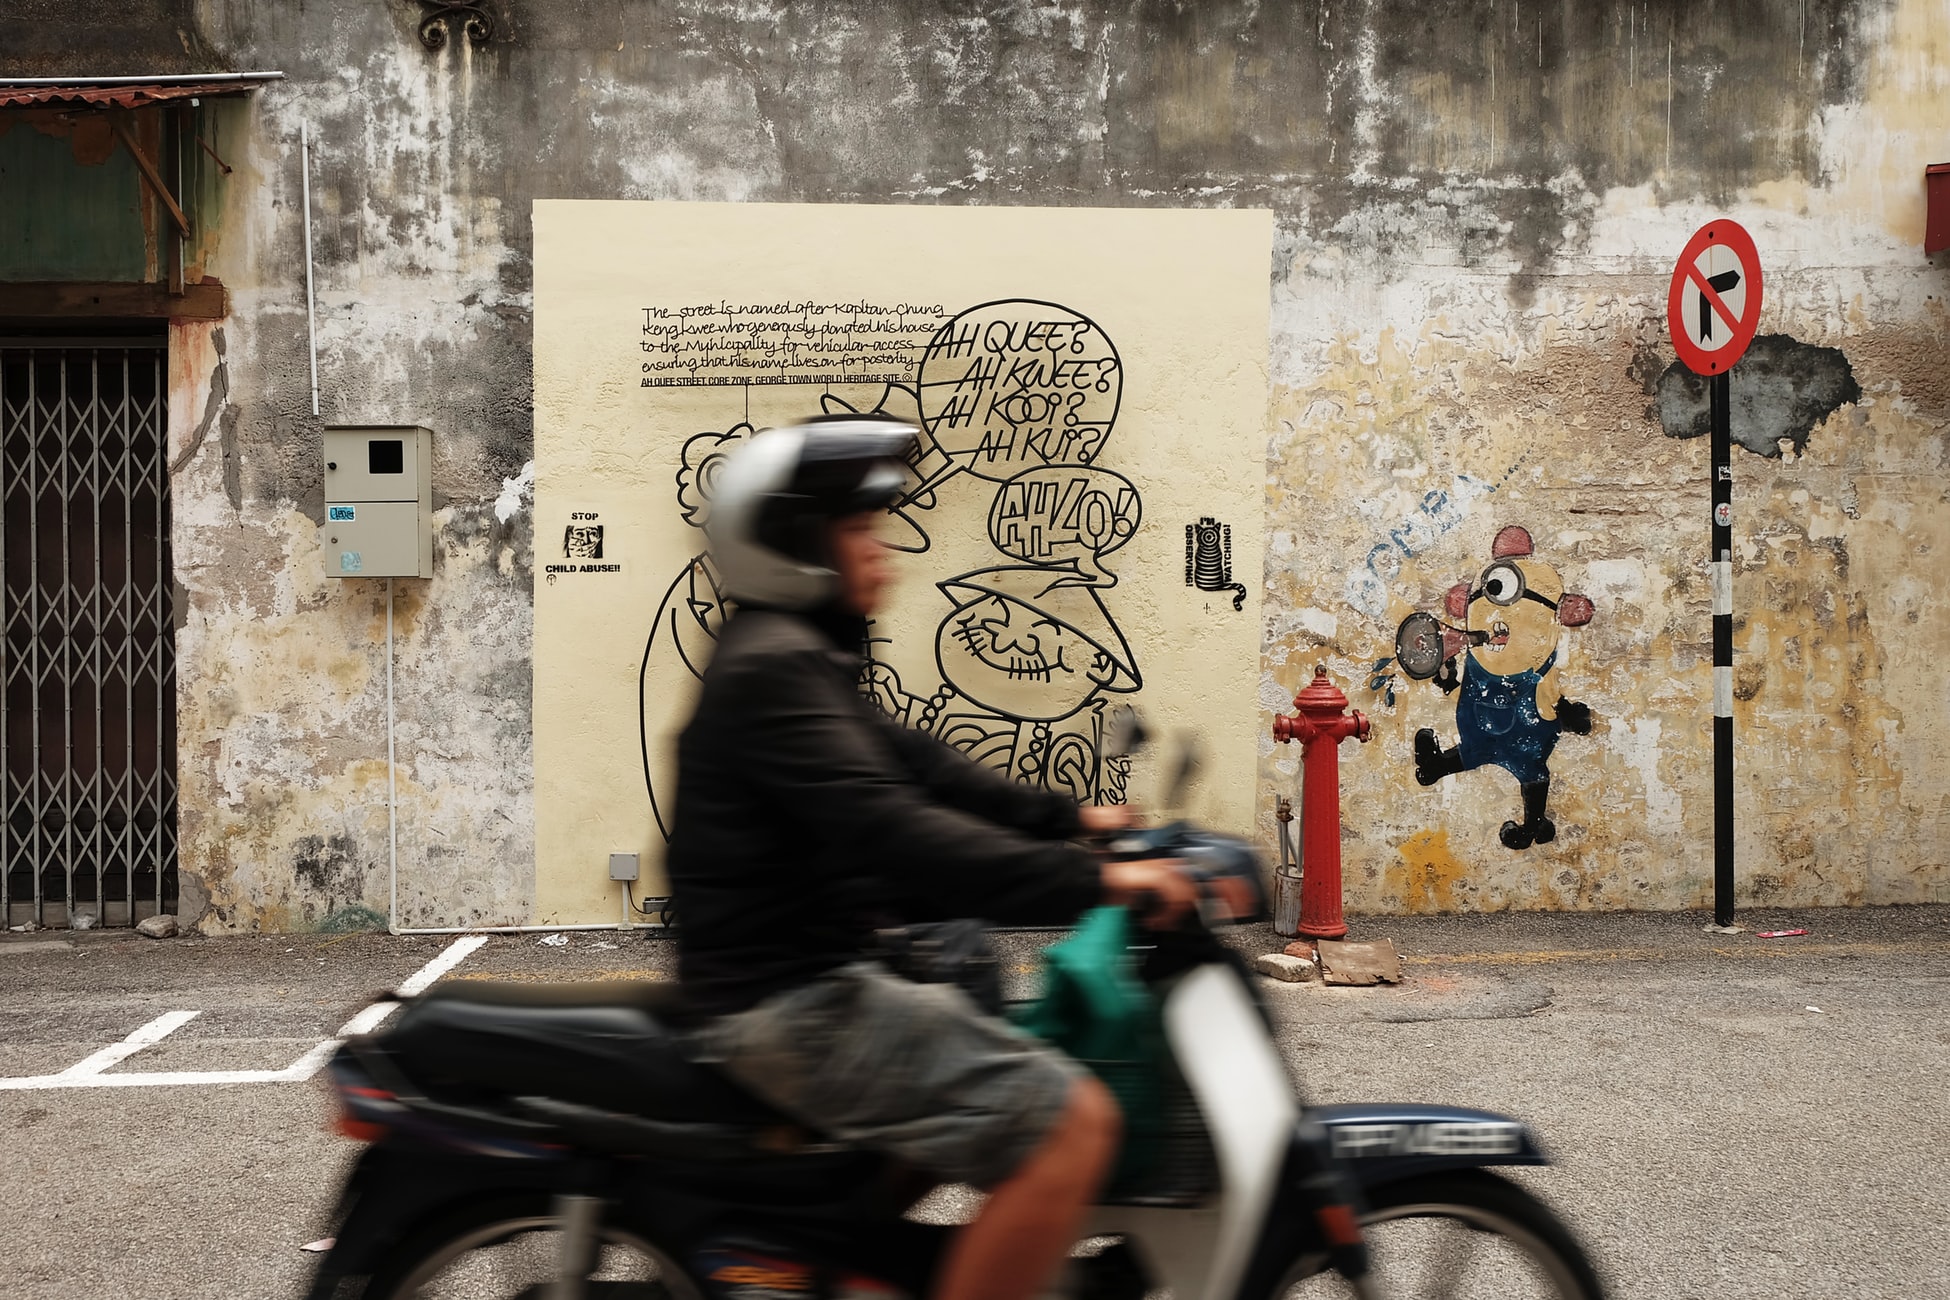 motorcyclist driving past mural